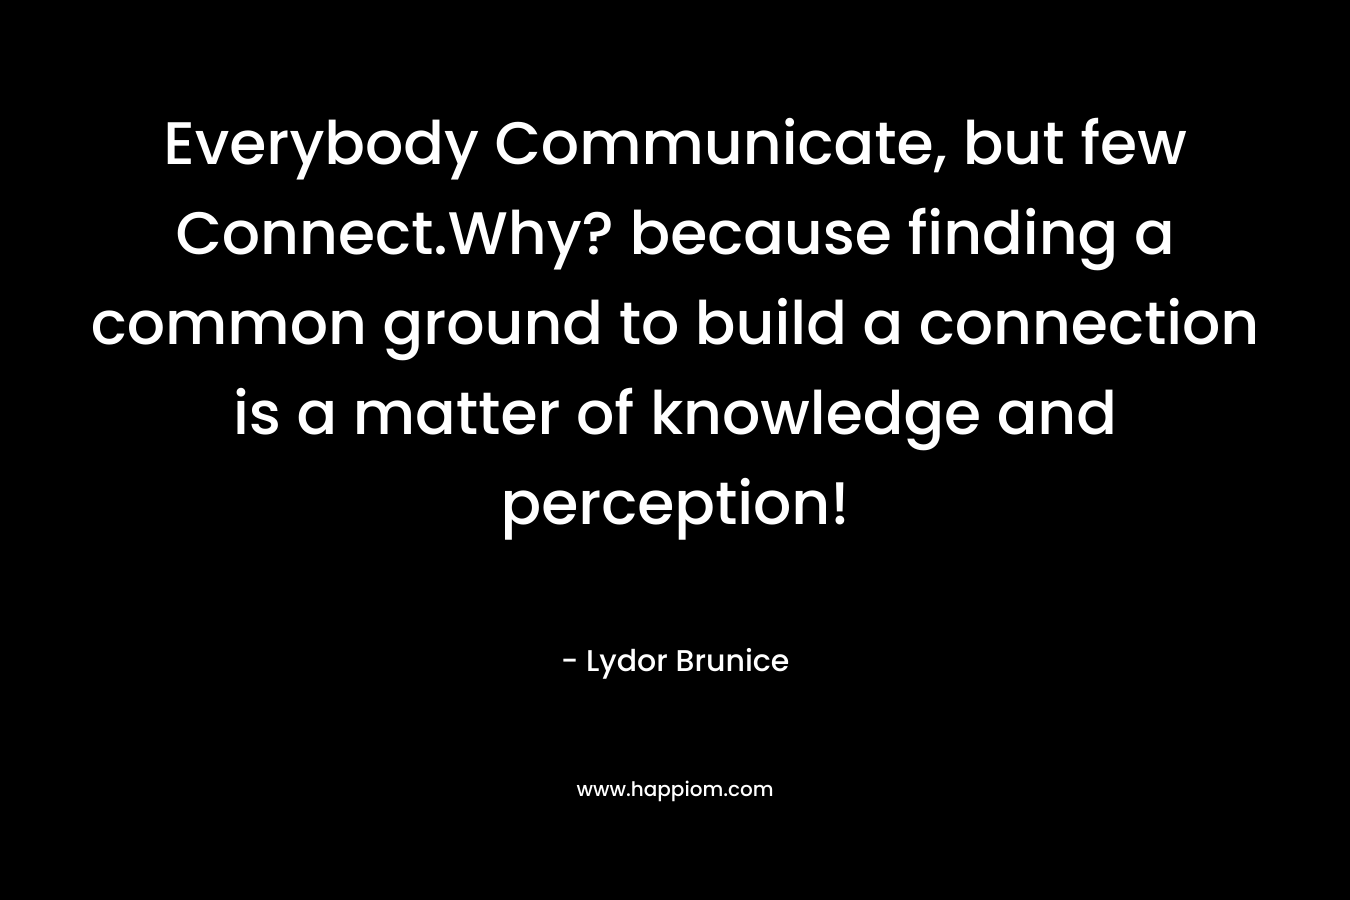 Everybody Communicate, but few Connect.Why? because finding a common ground to build a connection is a matter of knowledge and perception!